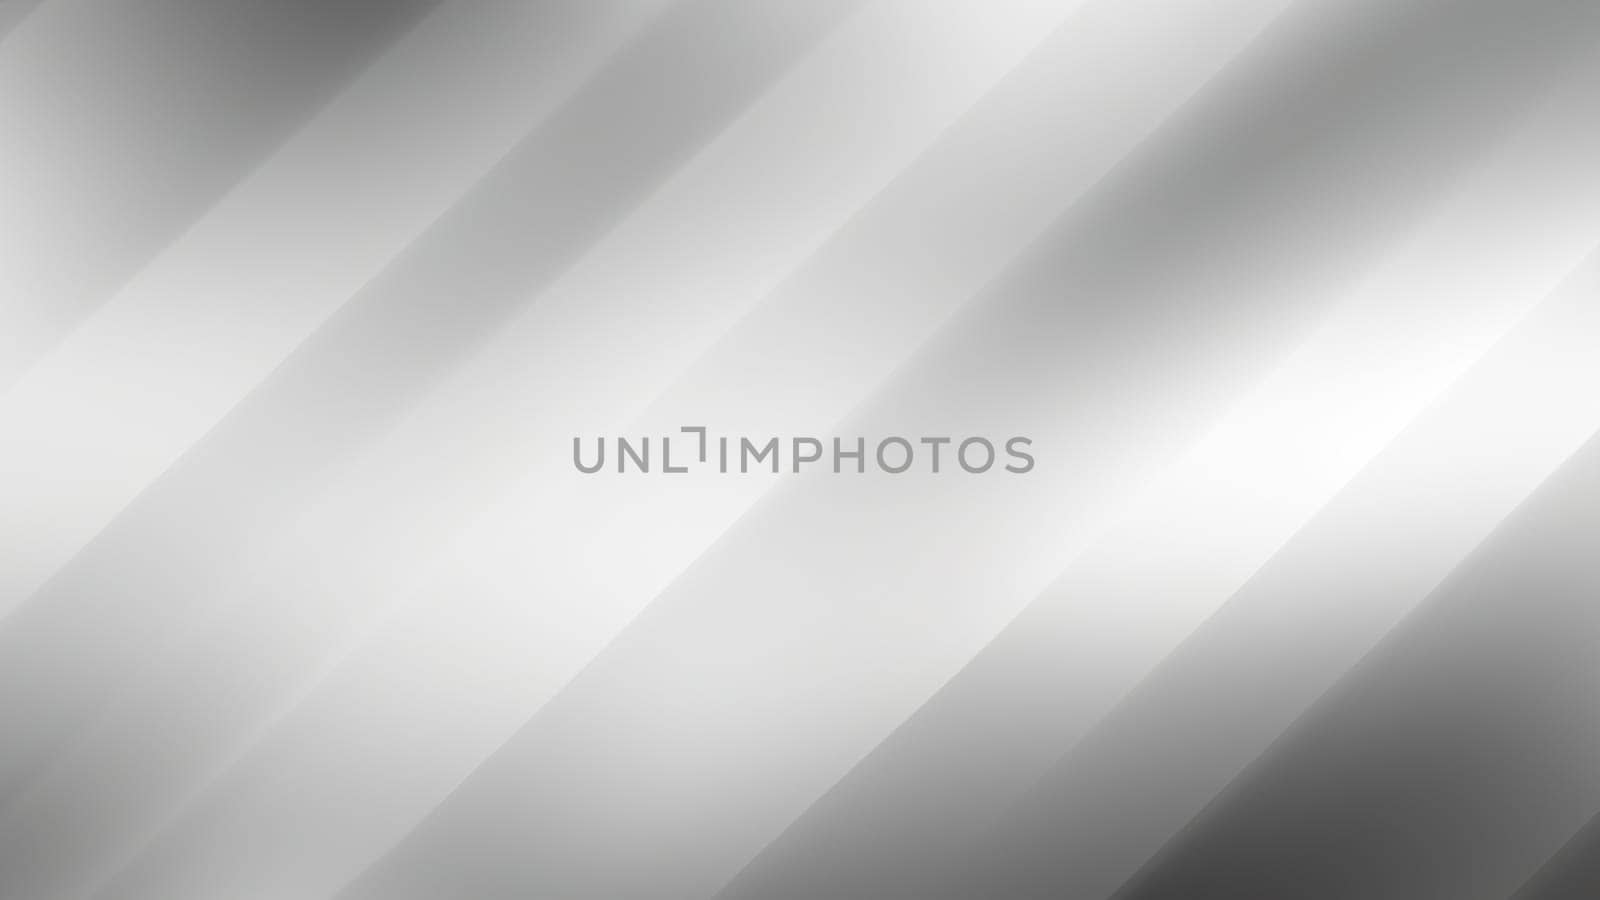 Abstract background with diagonal stripes in blurred white and grey by DesignMarjolein